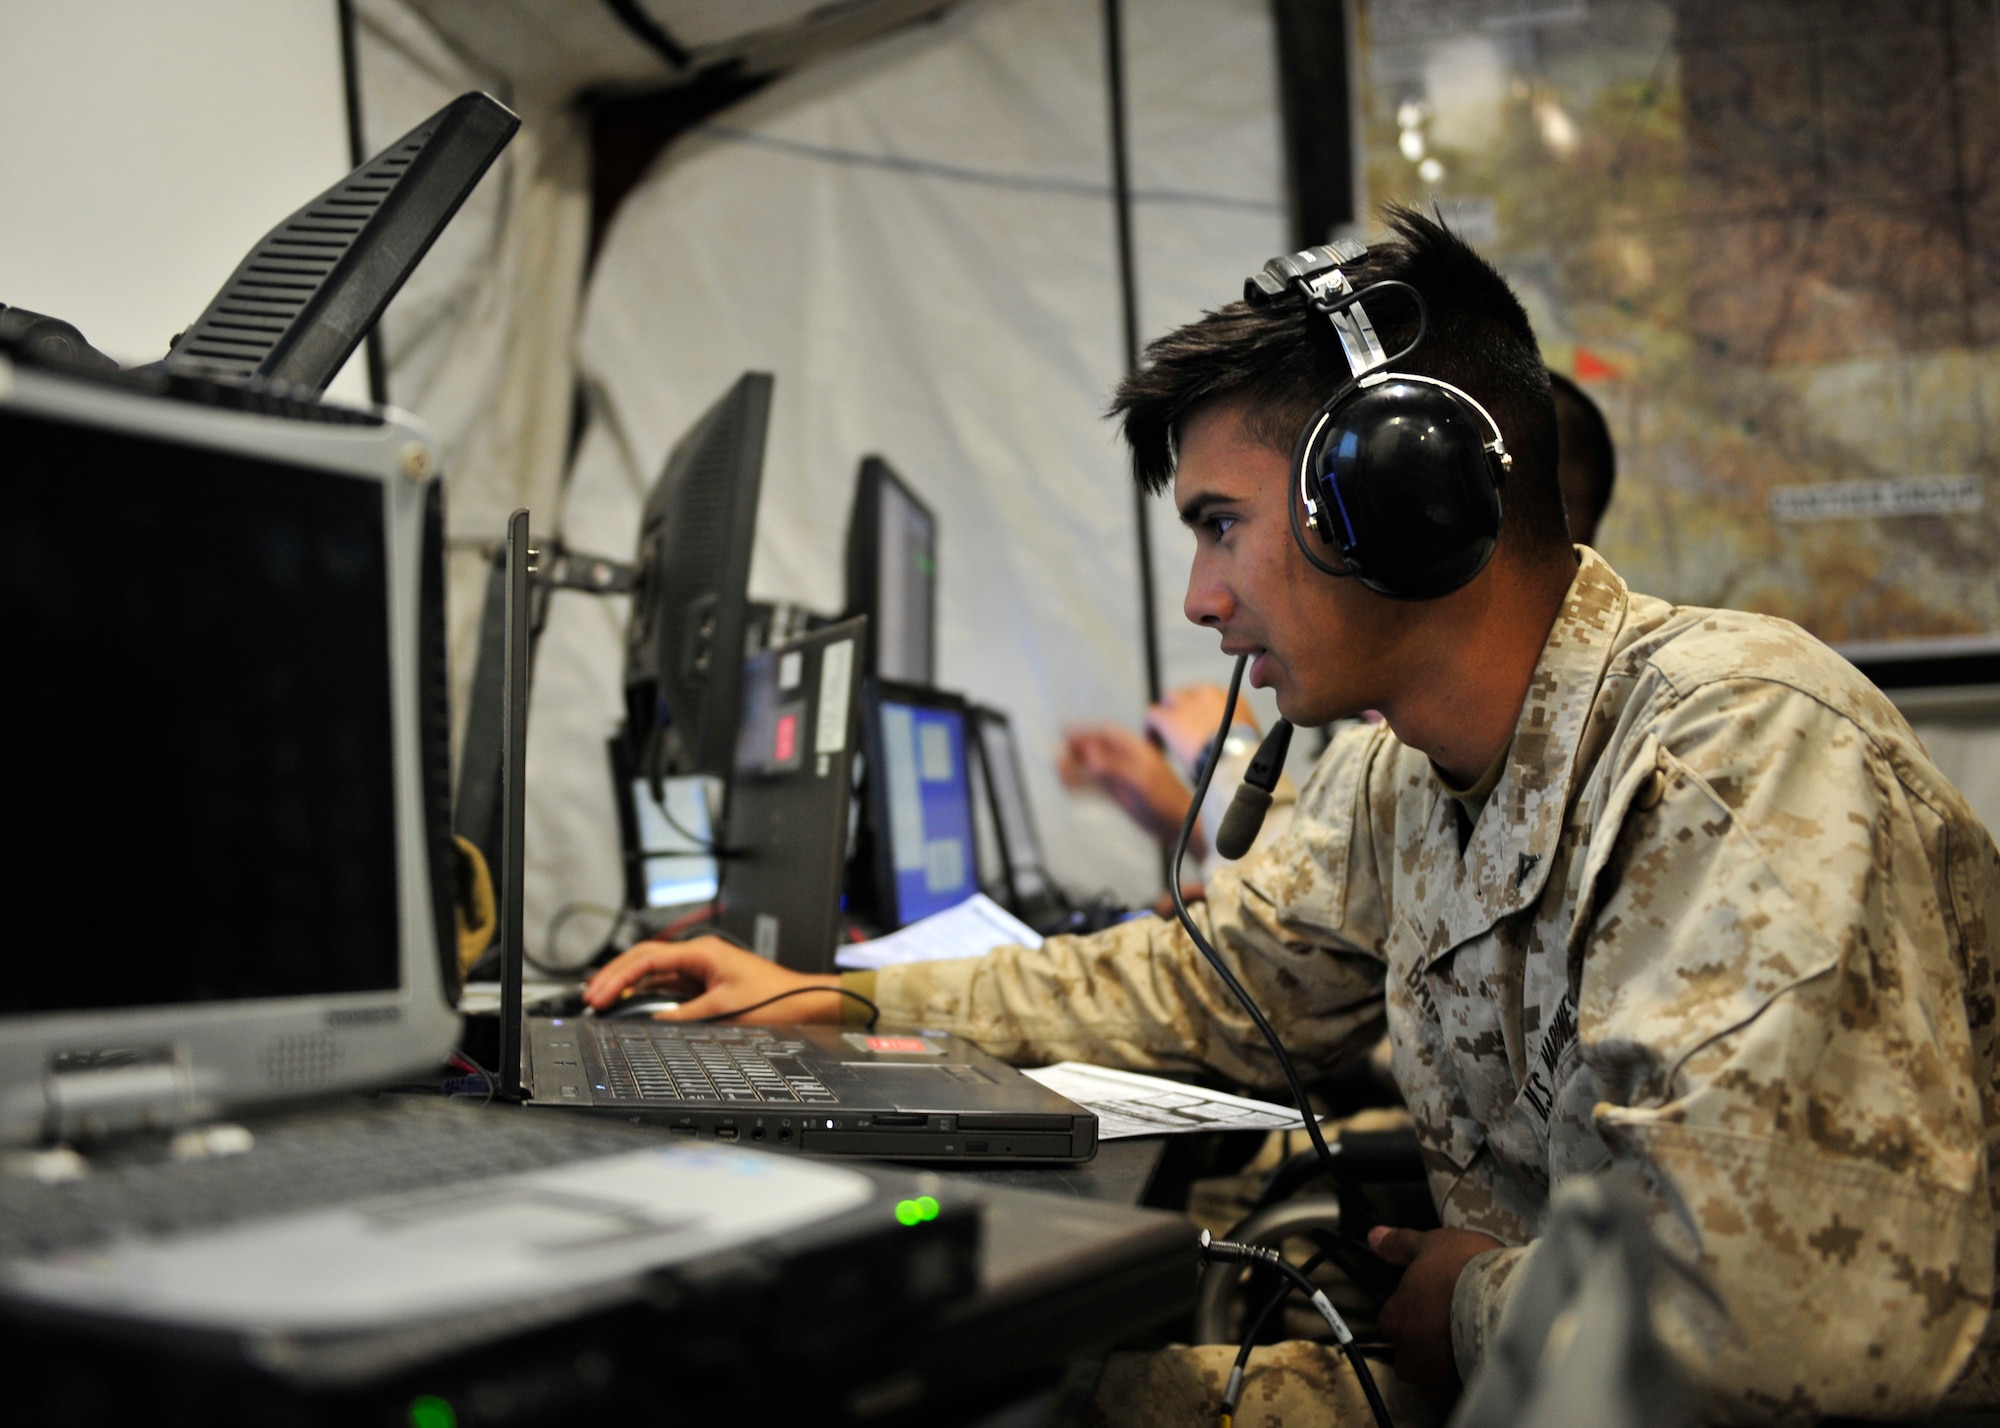 U.S. Marine Corps Lance Cpl. Alexander Banus, Marine Air Control Squadron 2 radar controller assigned to Marine Corps Air Station Cherry Point, N.C., communicates with an aircraft during Red Flag-Alaska 14-2 June 24, 2014, Joint Pacific Alaska Range Complex, Alaska. RF-A provided the Marine Air Control Agency with a live flight venue that has more aircraft flying during each event and gave operators a better feel of what they can expect in a combat situation (U.S. Air Force photo by Senior Airman Ashley Nicole Taylor/Released)